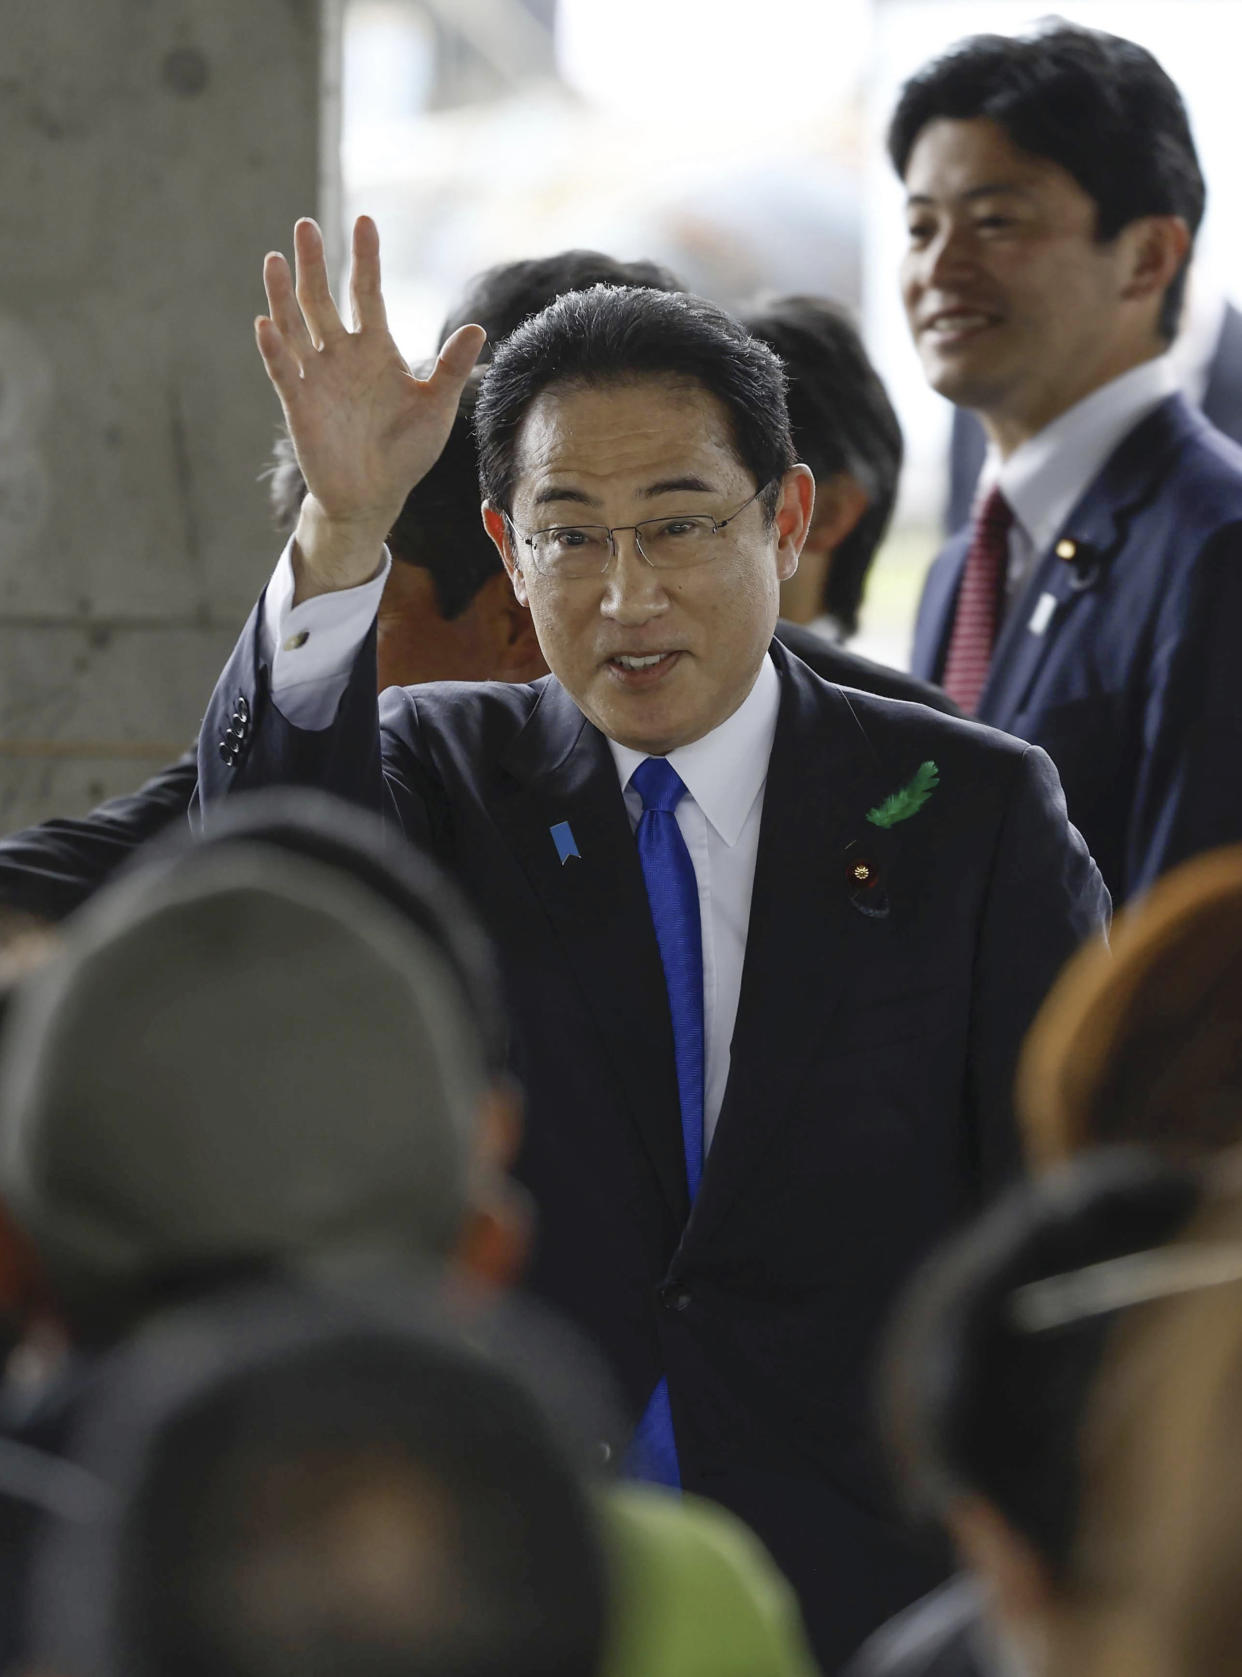 Japanese Prime Minister Fumio Kishida waves as he visits a port in Wakayama, western Japan to cheer his ruling party's candidate in a local election, Saturday, April 15, 2023. Japan’s NHK television reported Saturday that a loud explosion occurred at the western Japanese port during Kishida’s visit, but there were no injuries. (Kyodo News via AP)